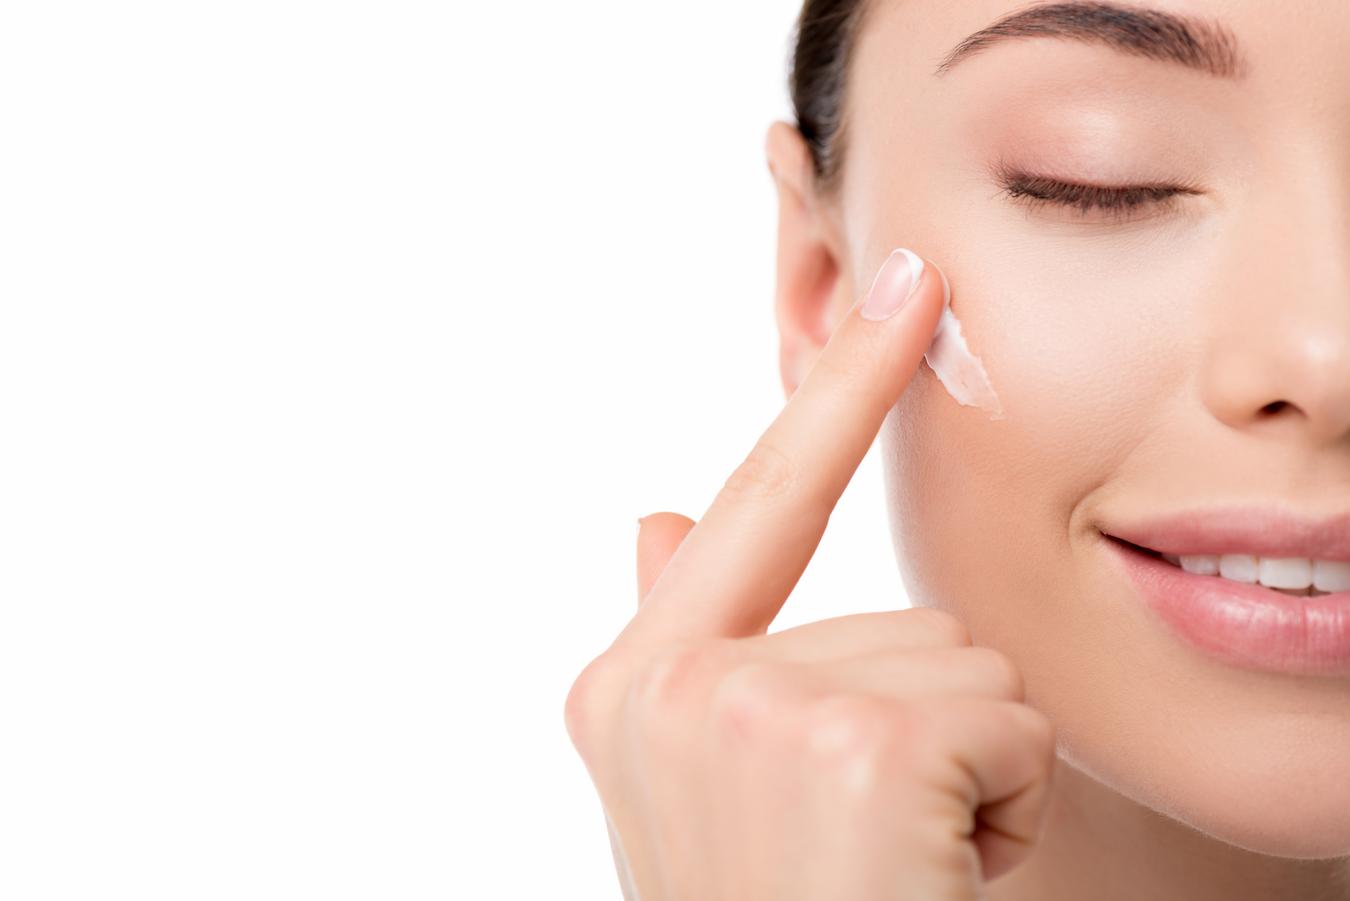 If you have a chronic skin condition that is causing your dry skin speak to a dermatologist